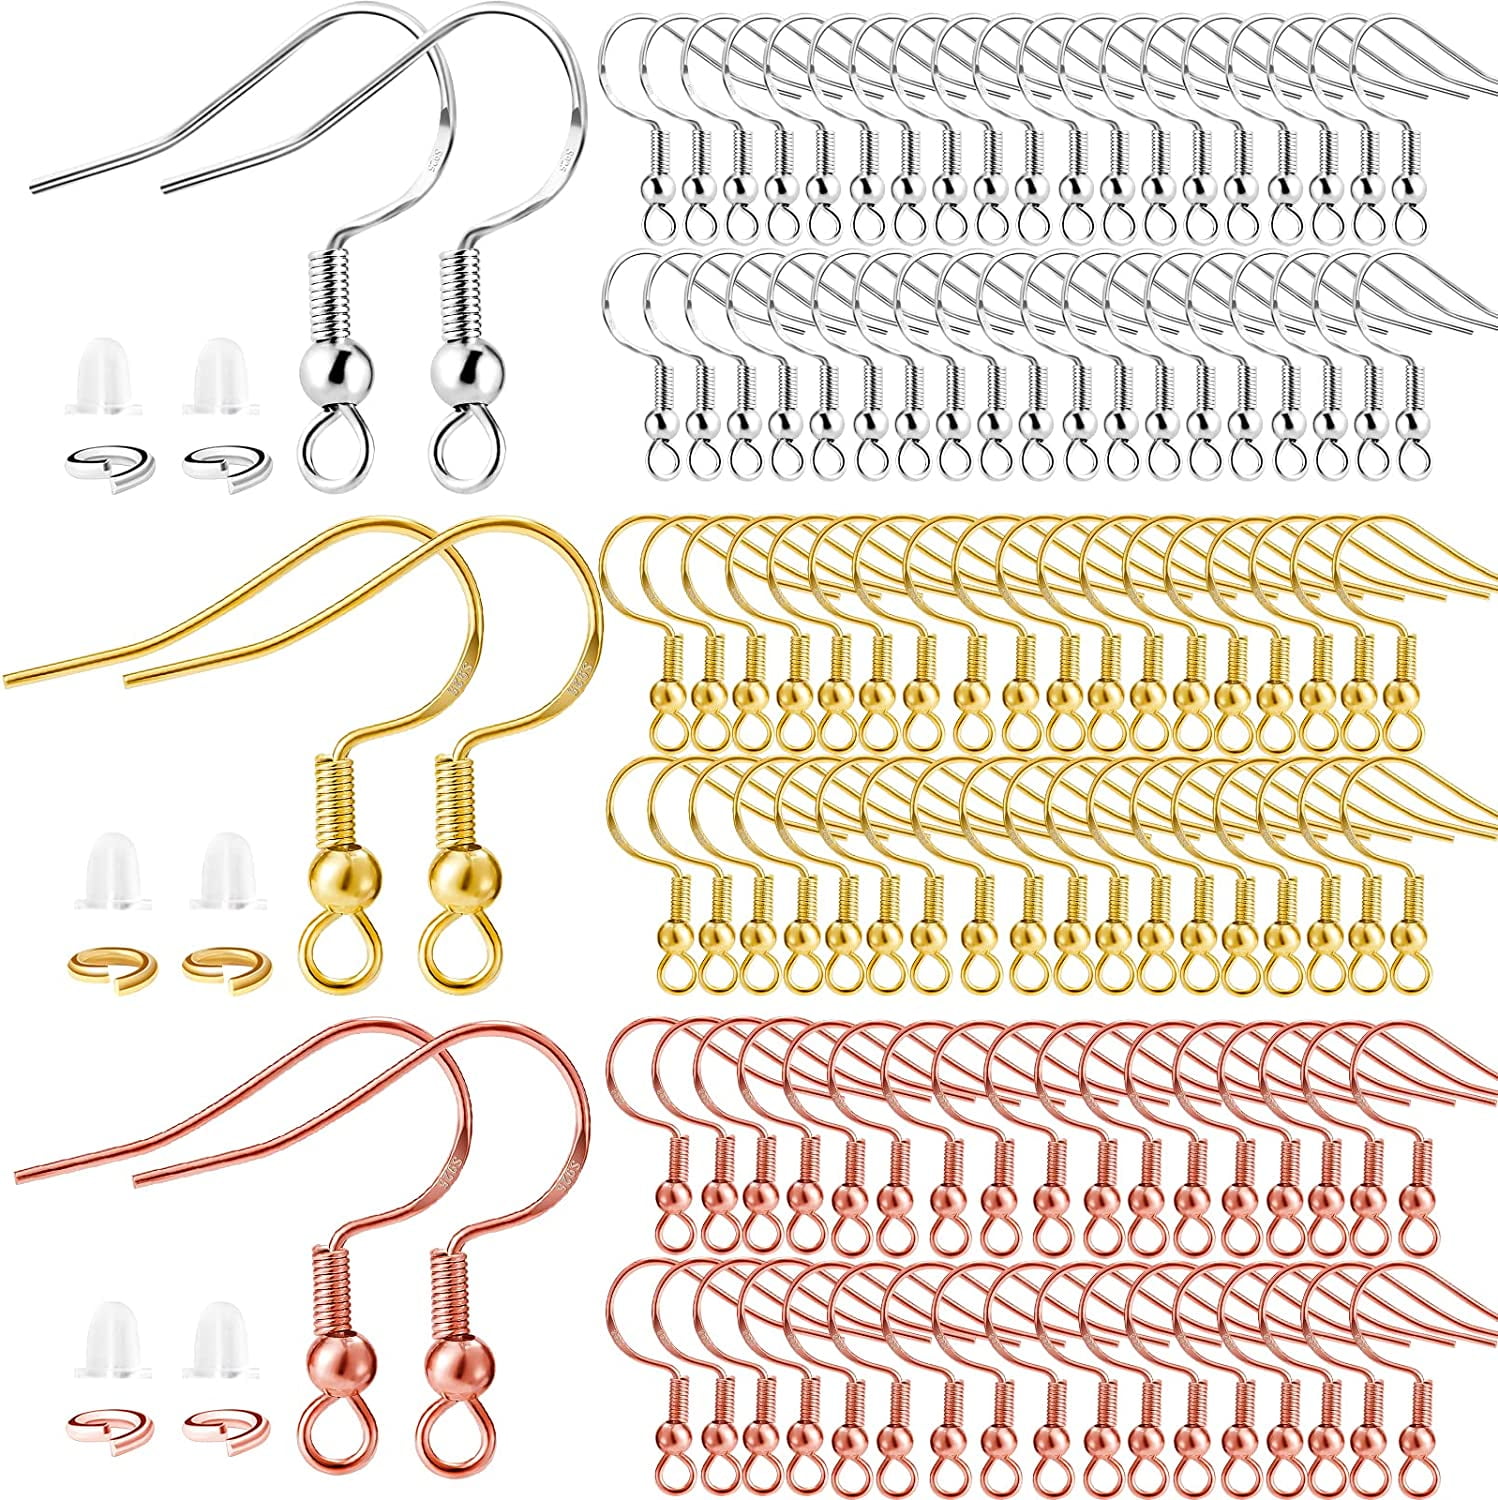 TOAOB 700pcs Earrings Making Kit with Hypoallergenic 925 Sterling Gold